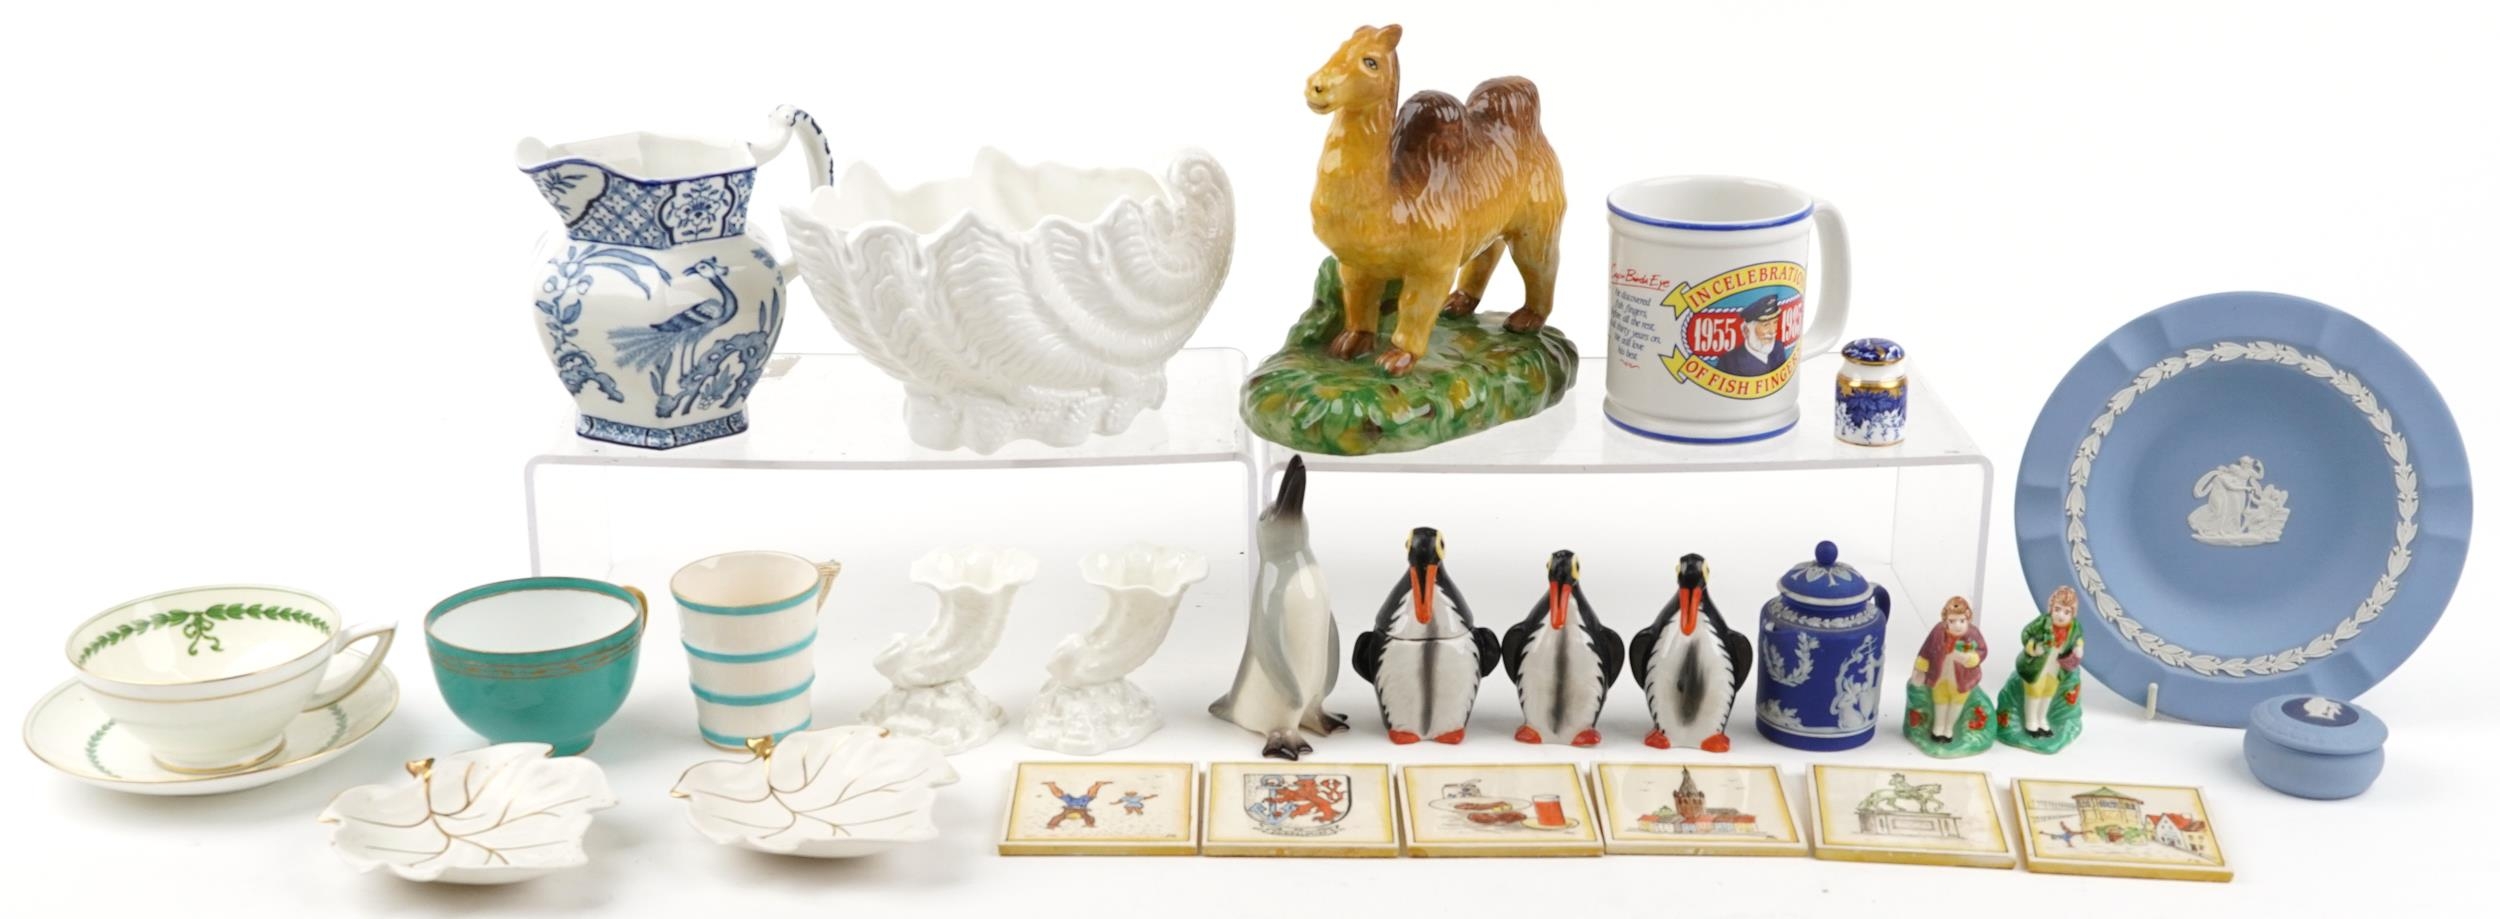 Victorian and later china including Staffordshire style camel, Wedgwood plate, Minton cup and